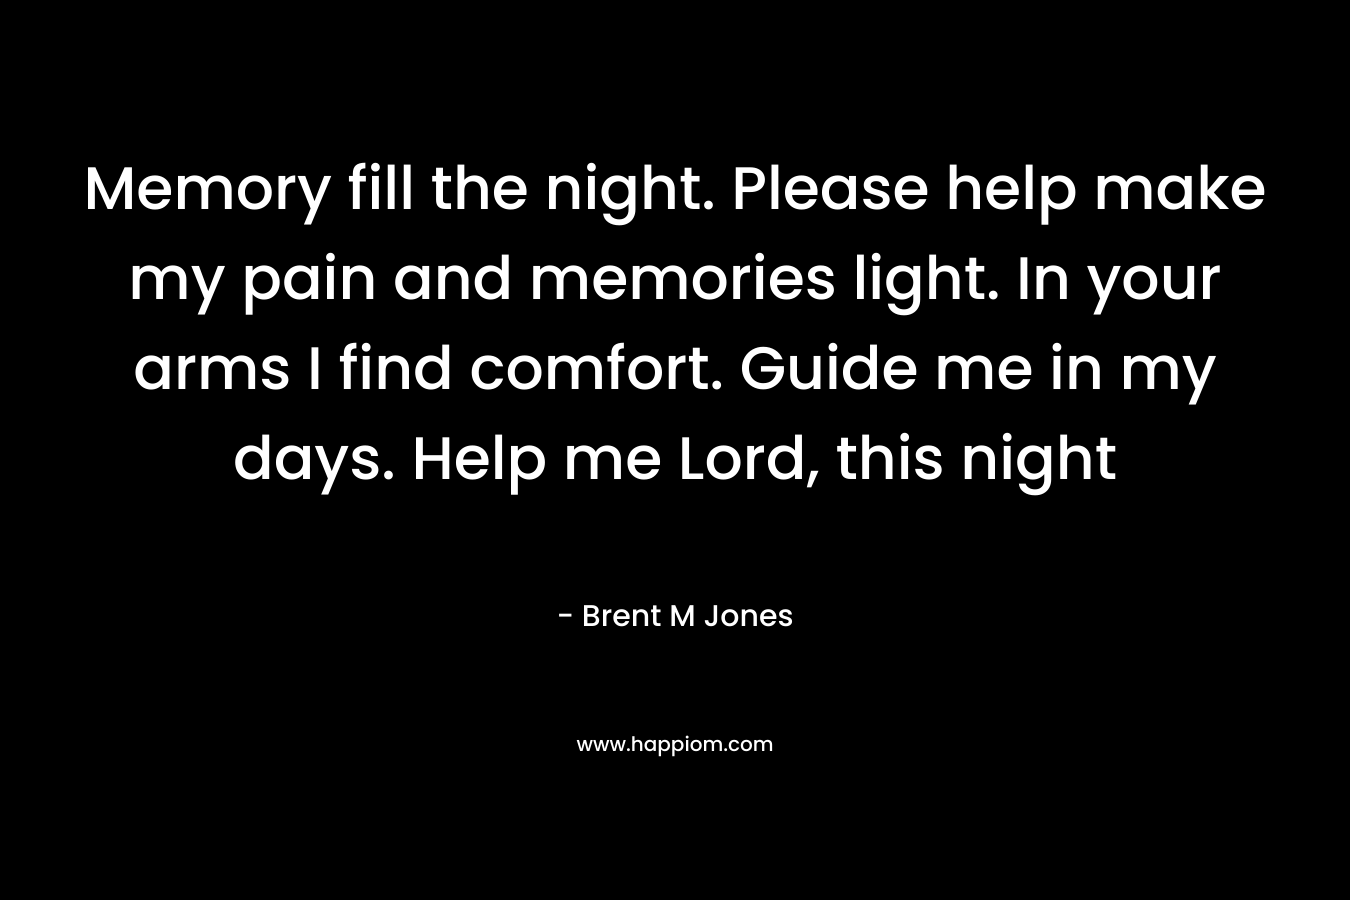 Memory fill the night. Please help make my pain and memories light. In your arms I find comfort. Guide me in my days. Help me Lord, this night